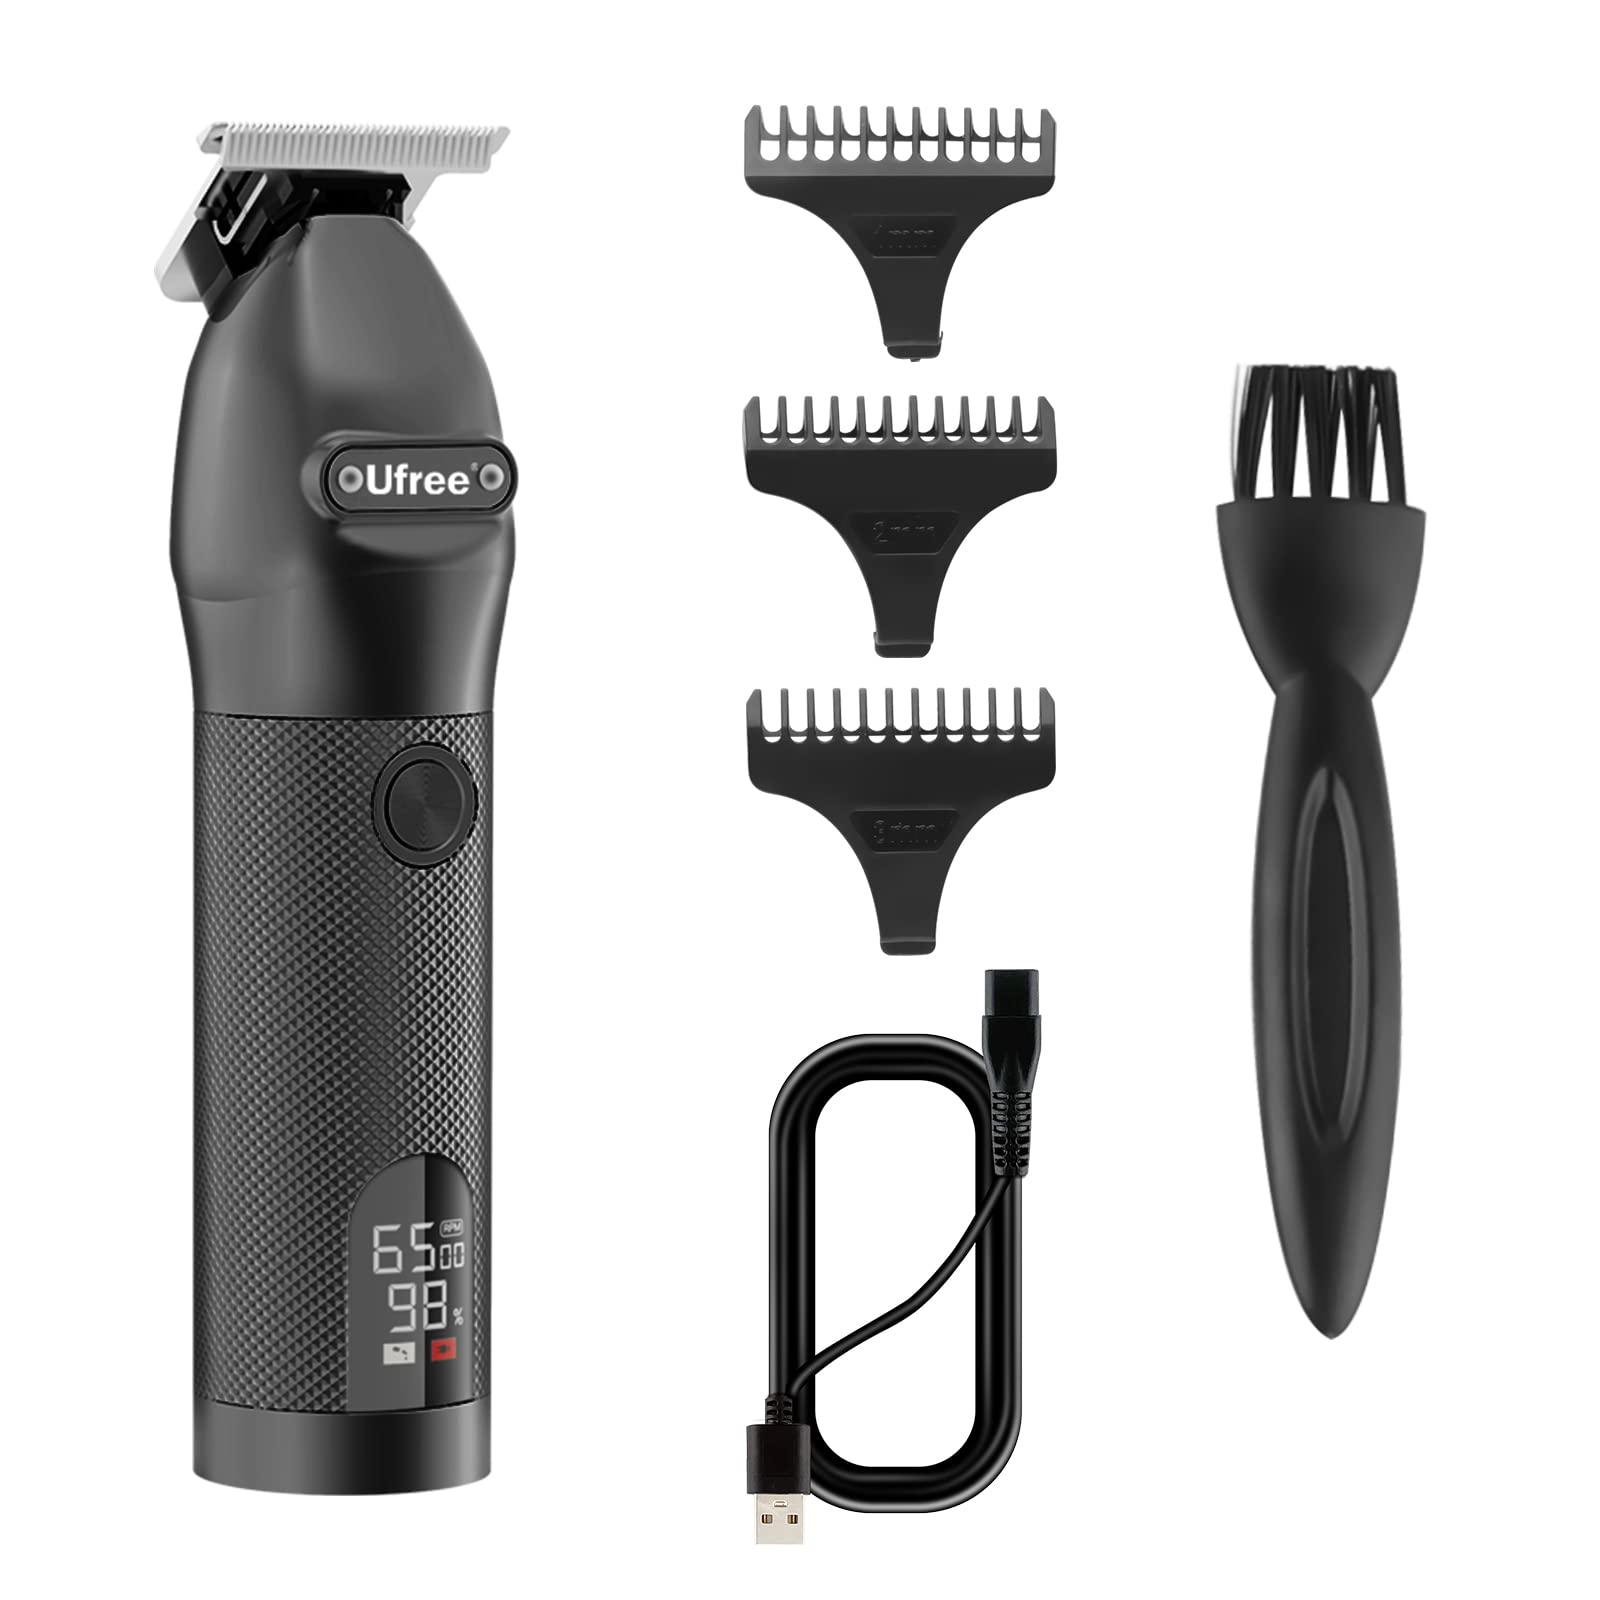 Professional Hair Clippers for Men, Cordless Zero Gapped T-blade